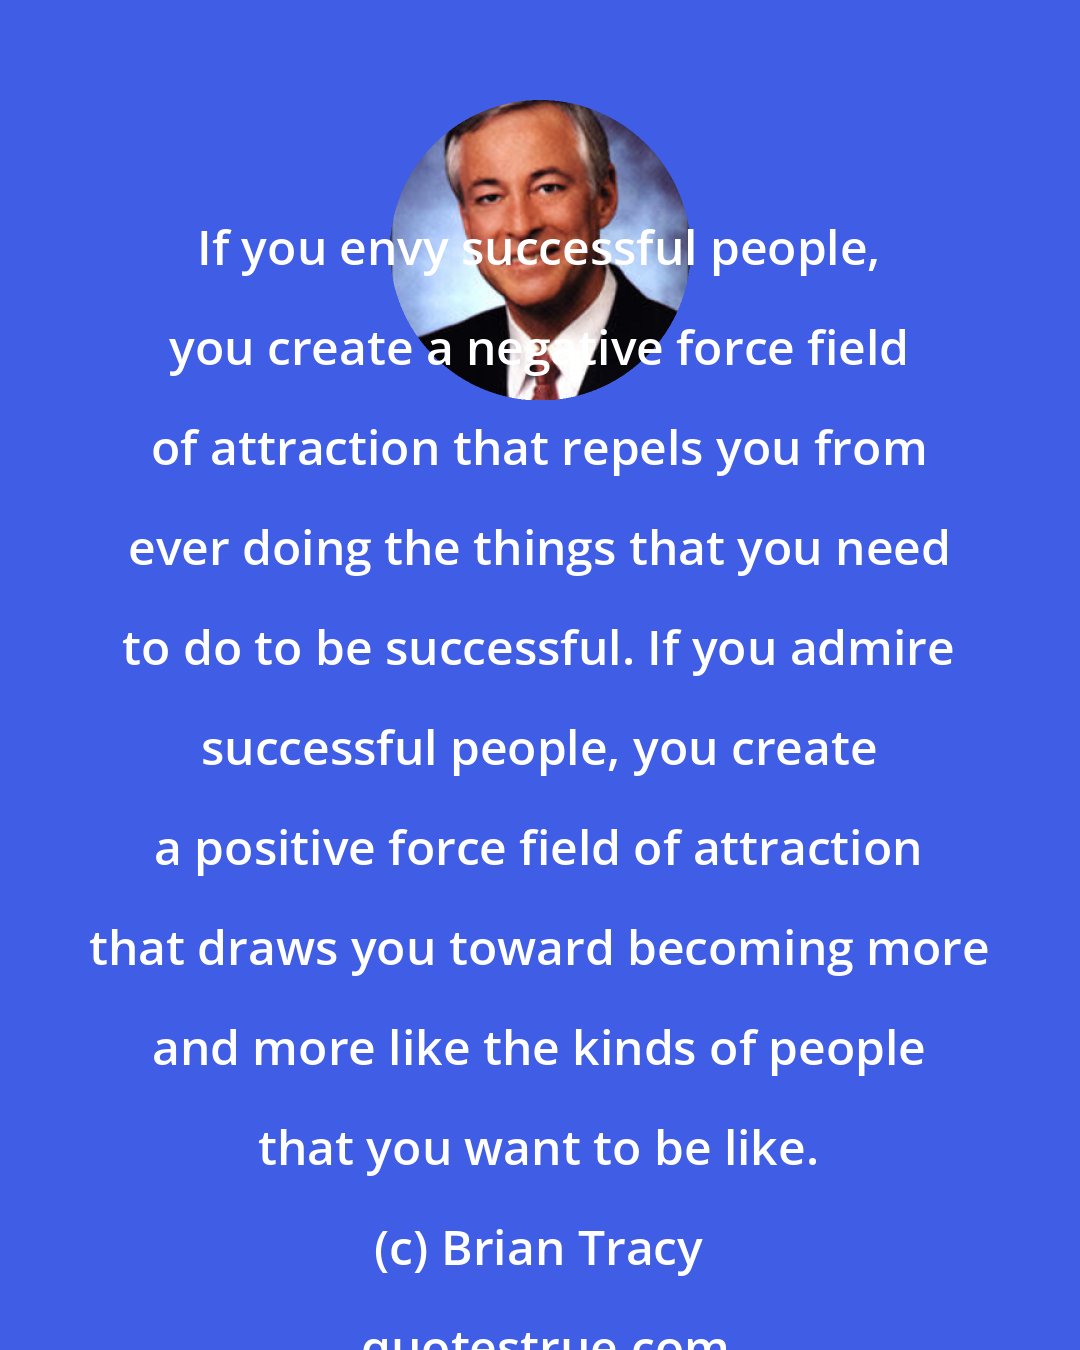 Brian Tracy: If you envy successful people, you create a negative force field of attraction that repels you from ever doing the things that you need to do to be successful. If you admire successful people, you create a positive force field of attraction that draws you toward becoming more and more like the kinds of people that you want to be like.